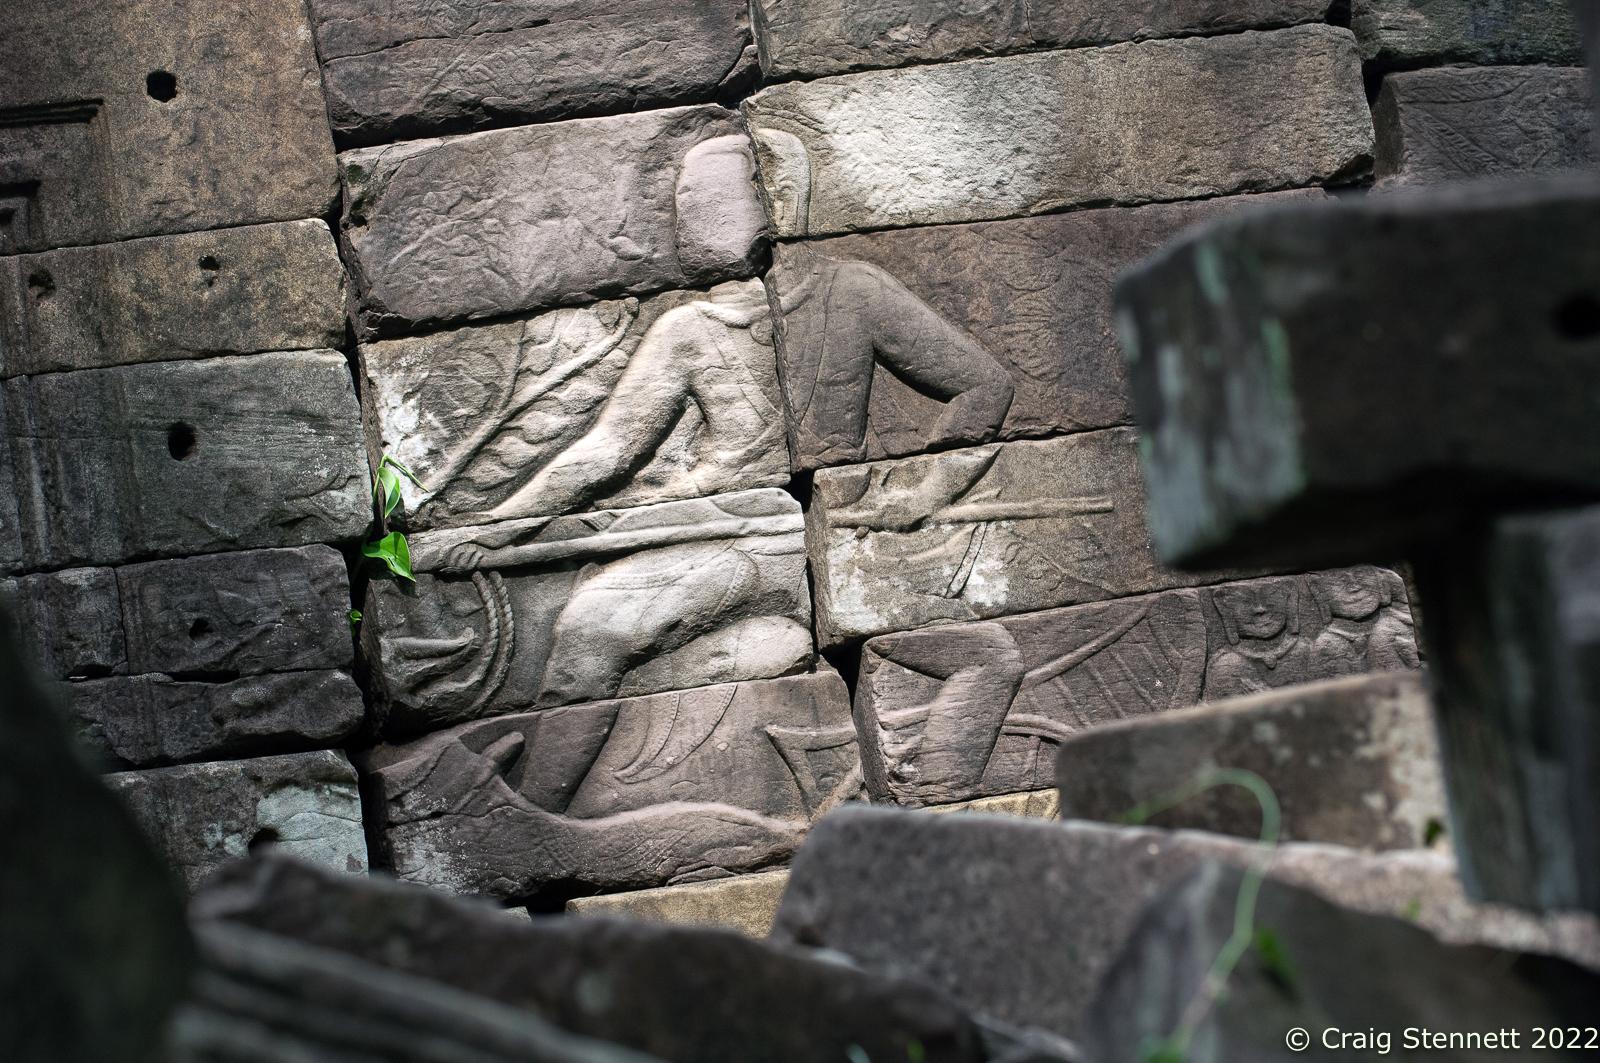 The Lost Temple, Banteay Chhmar.